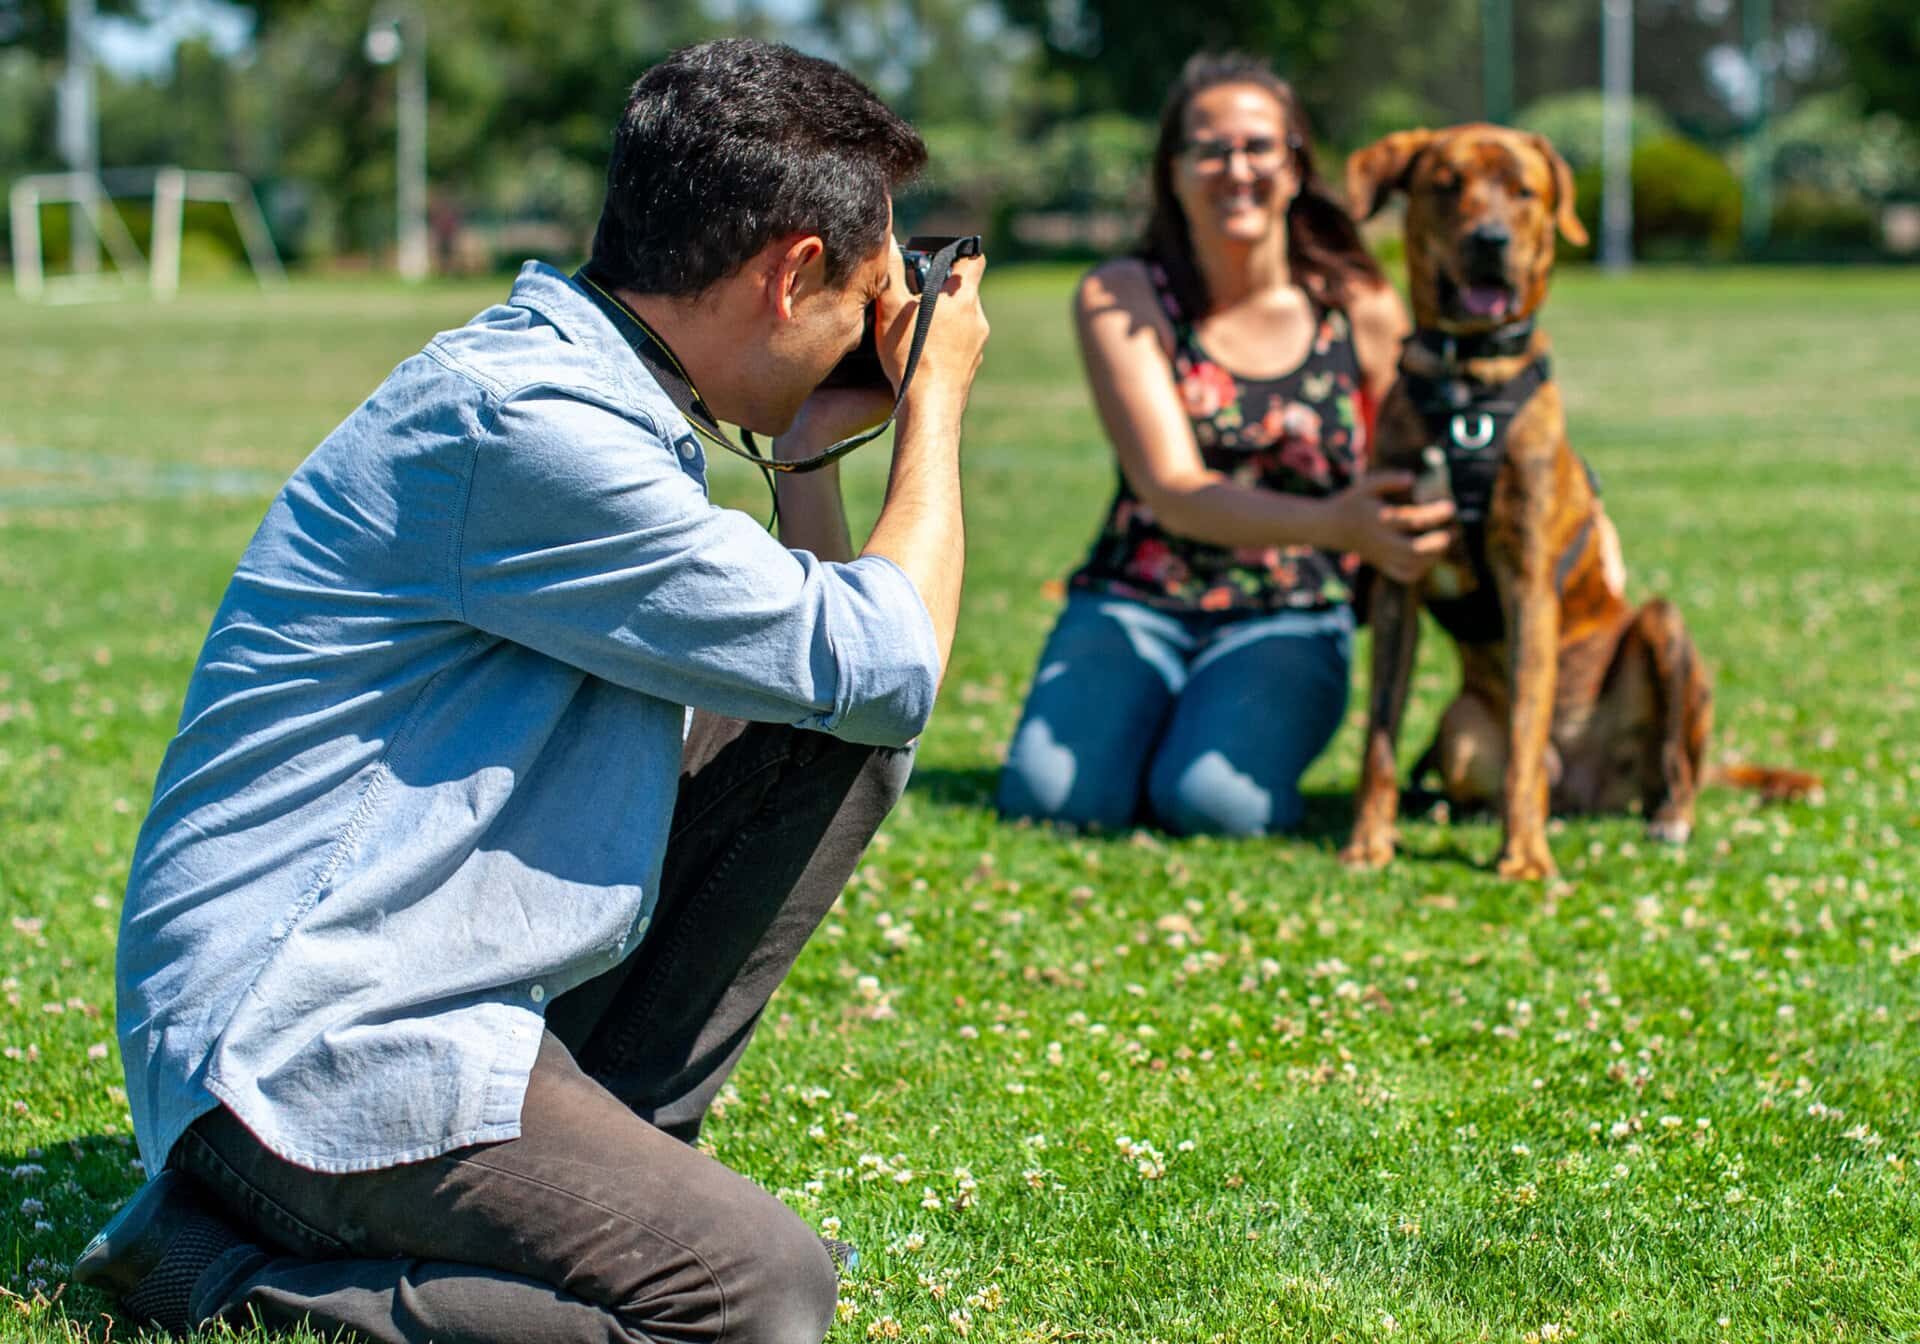 A photographer squats down while photographing a young woman posing with her dog in a park